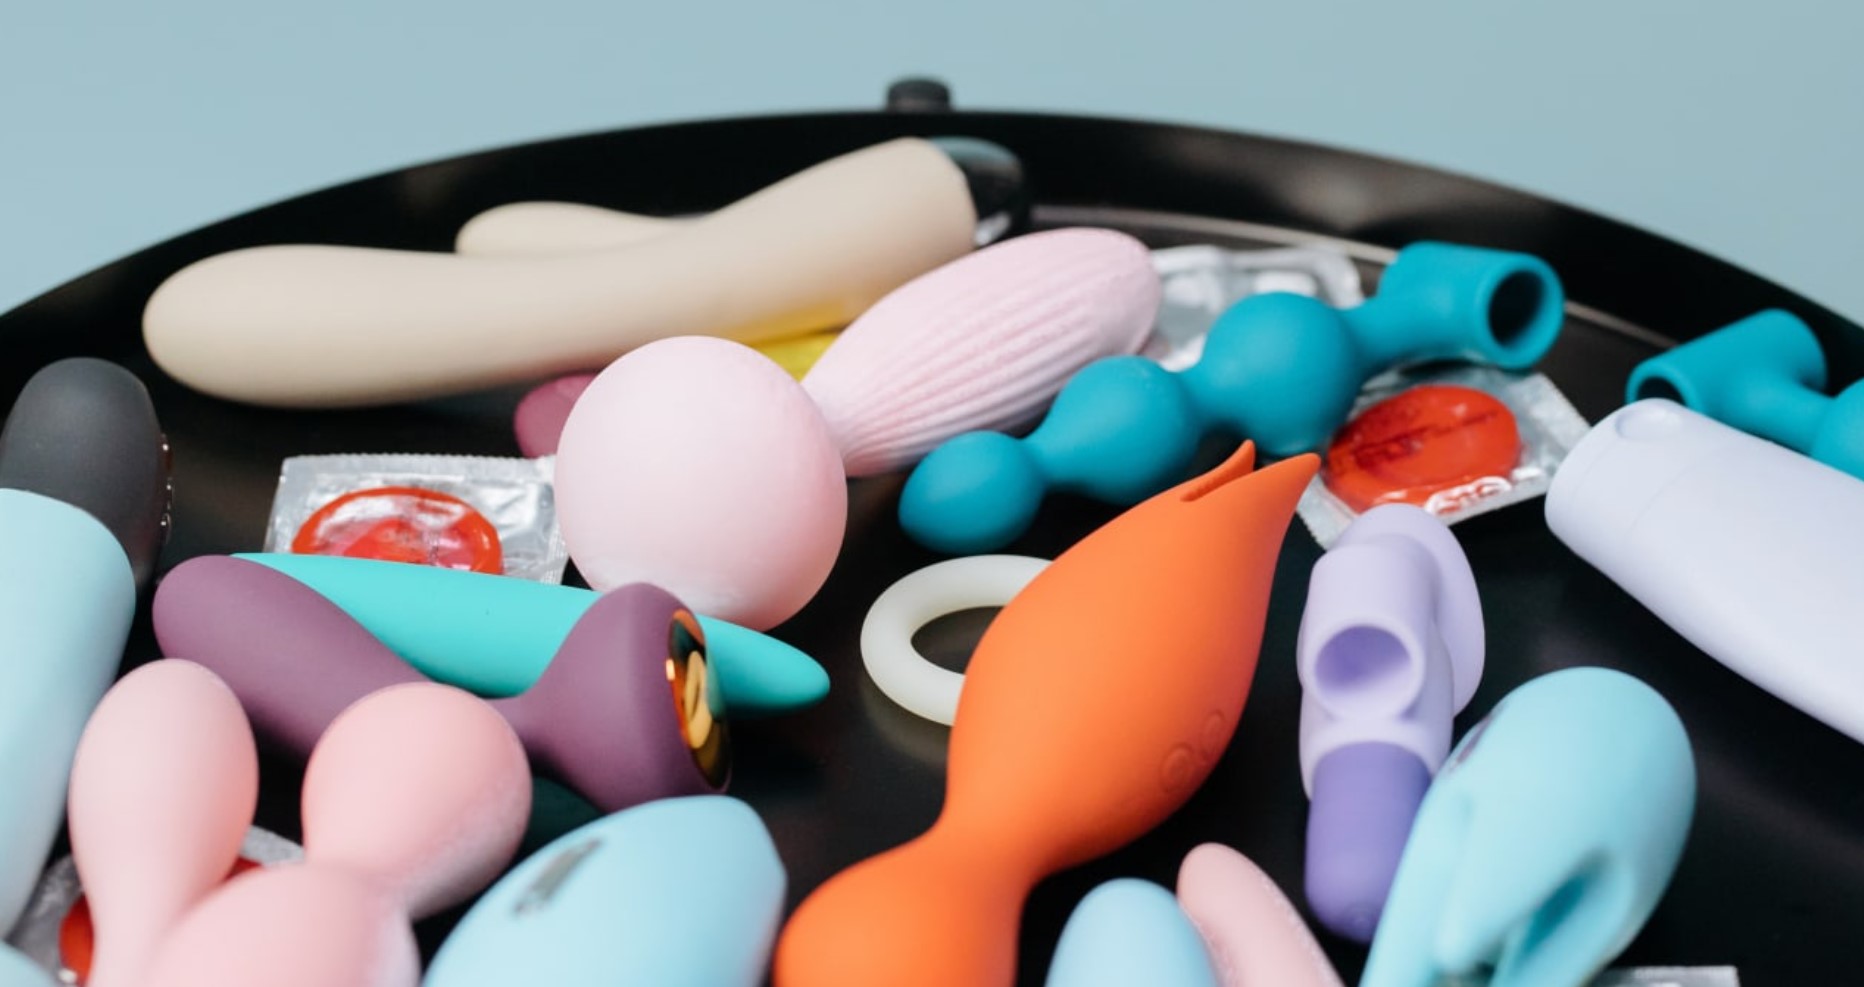 The Sex Toys: Modern Innovations